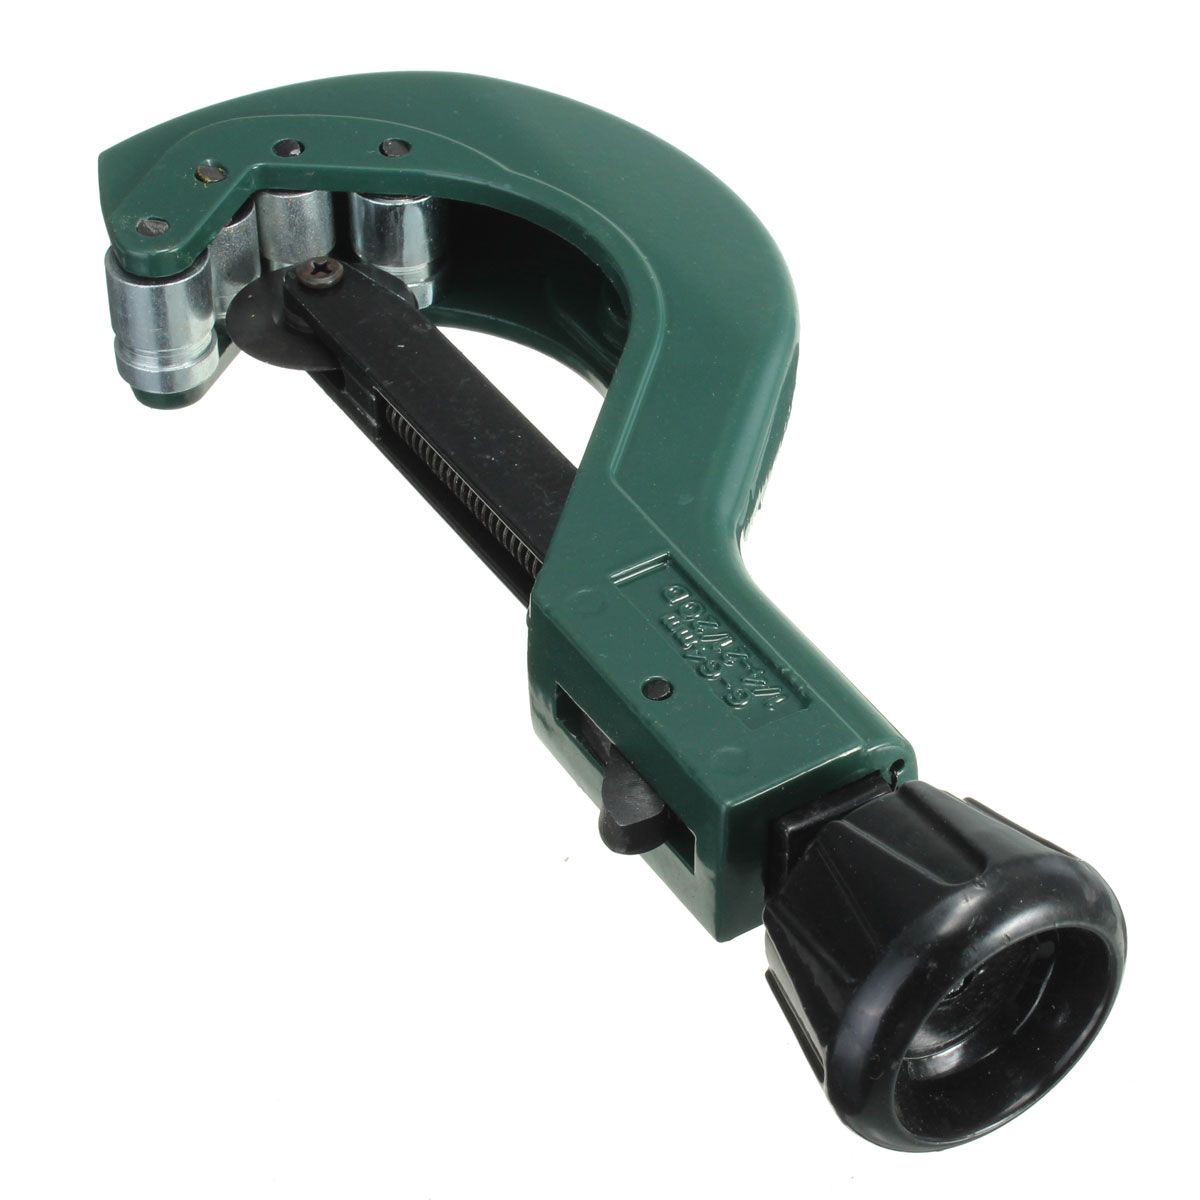 6-64mm-Heavy-Duty-Silverline-Plumbers-Quick-Release-Tube-Pipe-Cutter-Tool-1041481